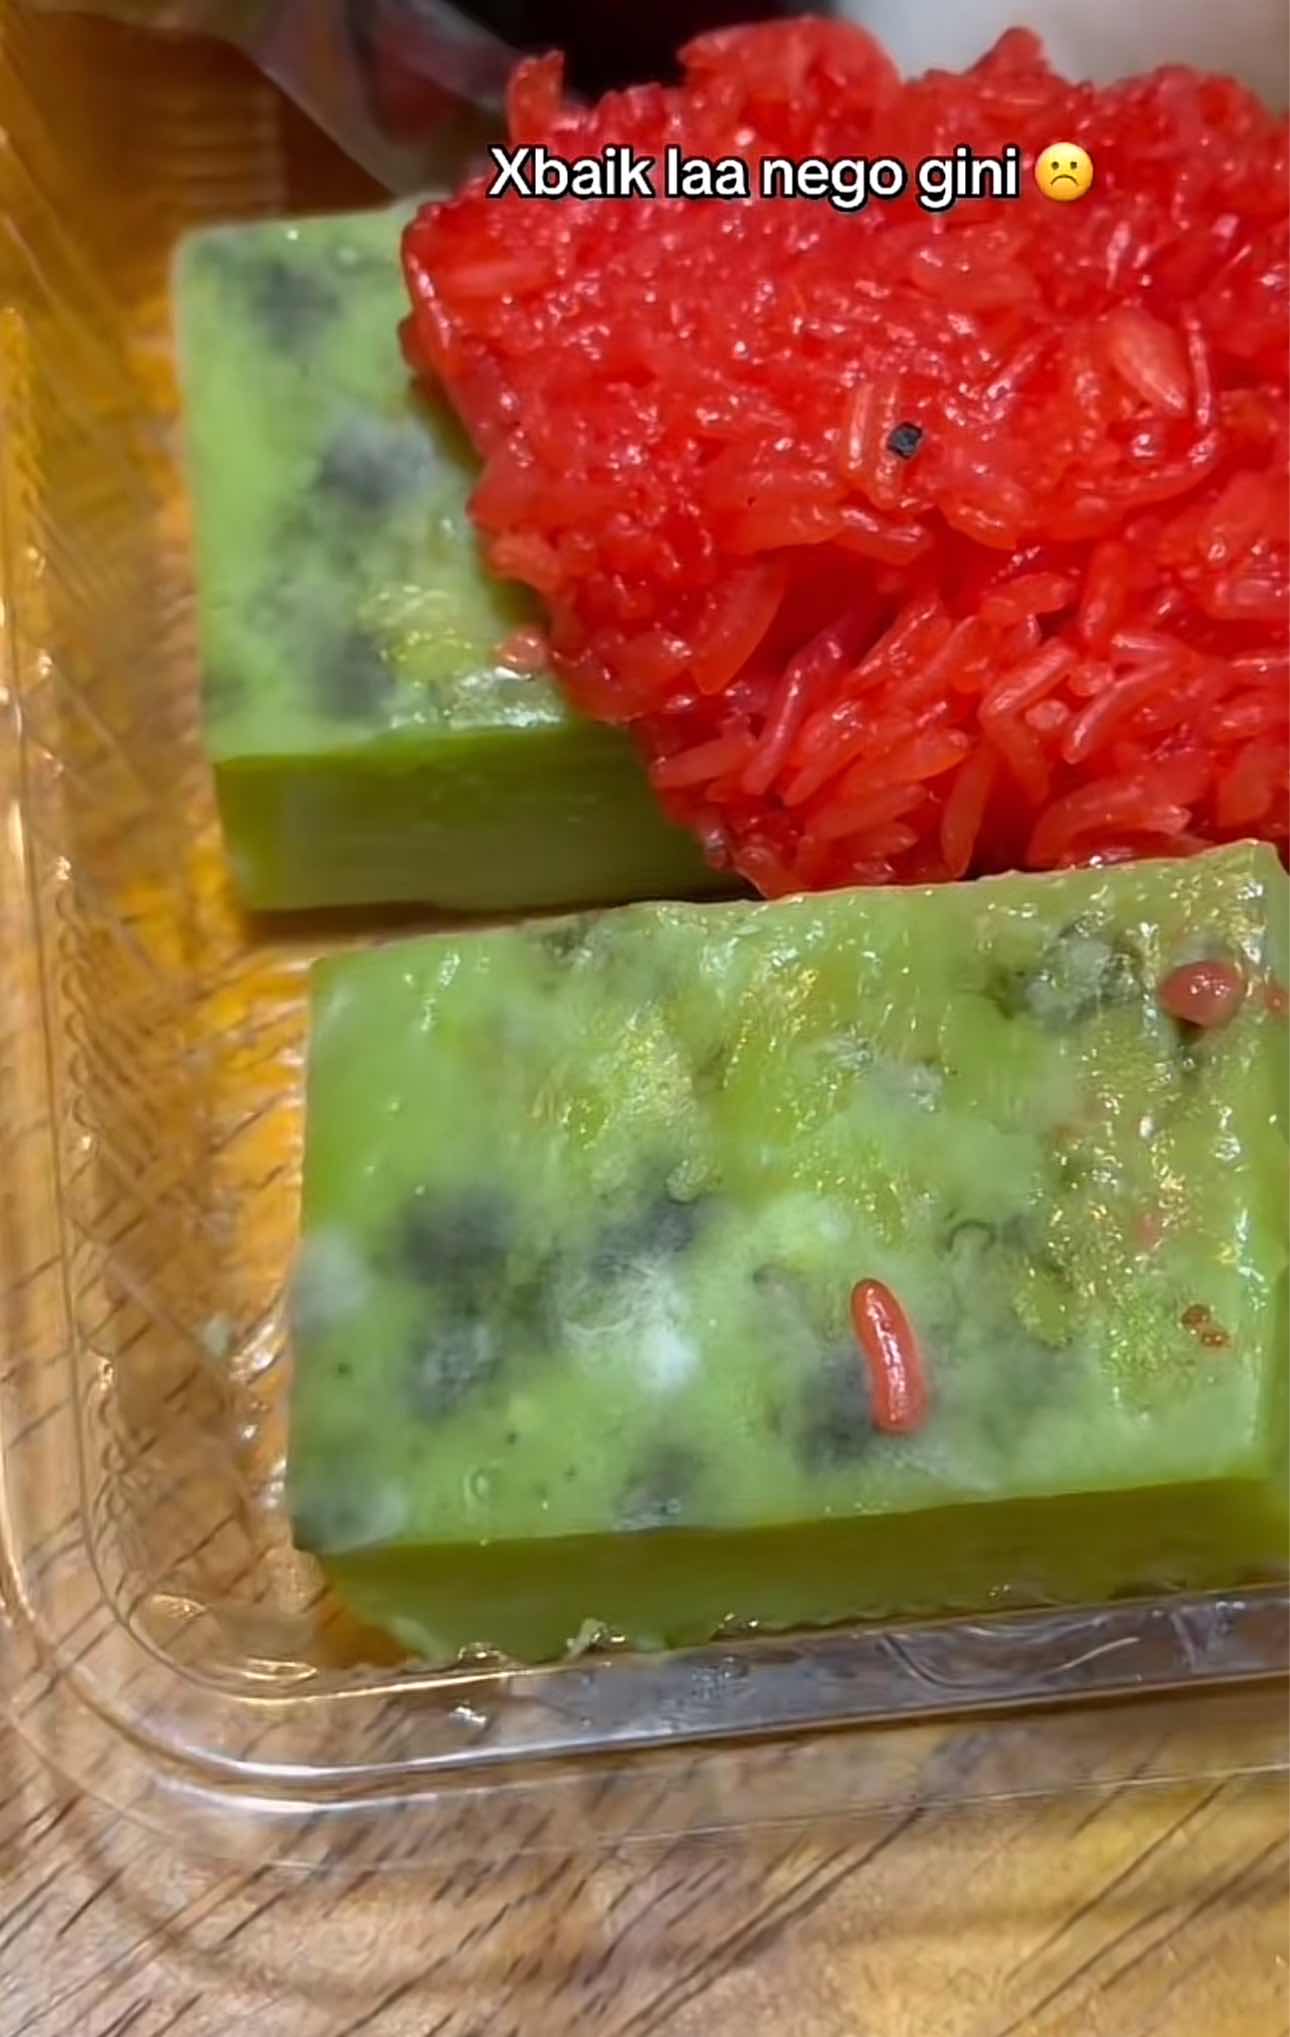 Kuih filled with mold on top of it